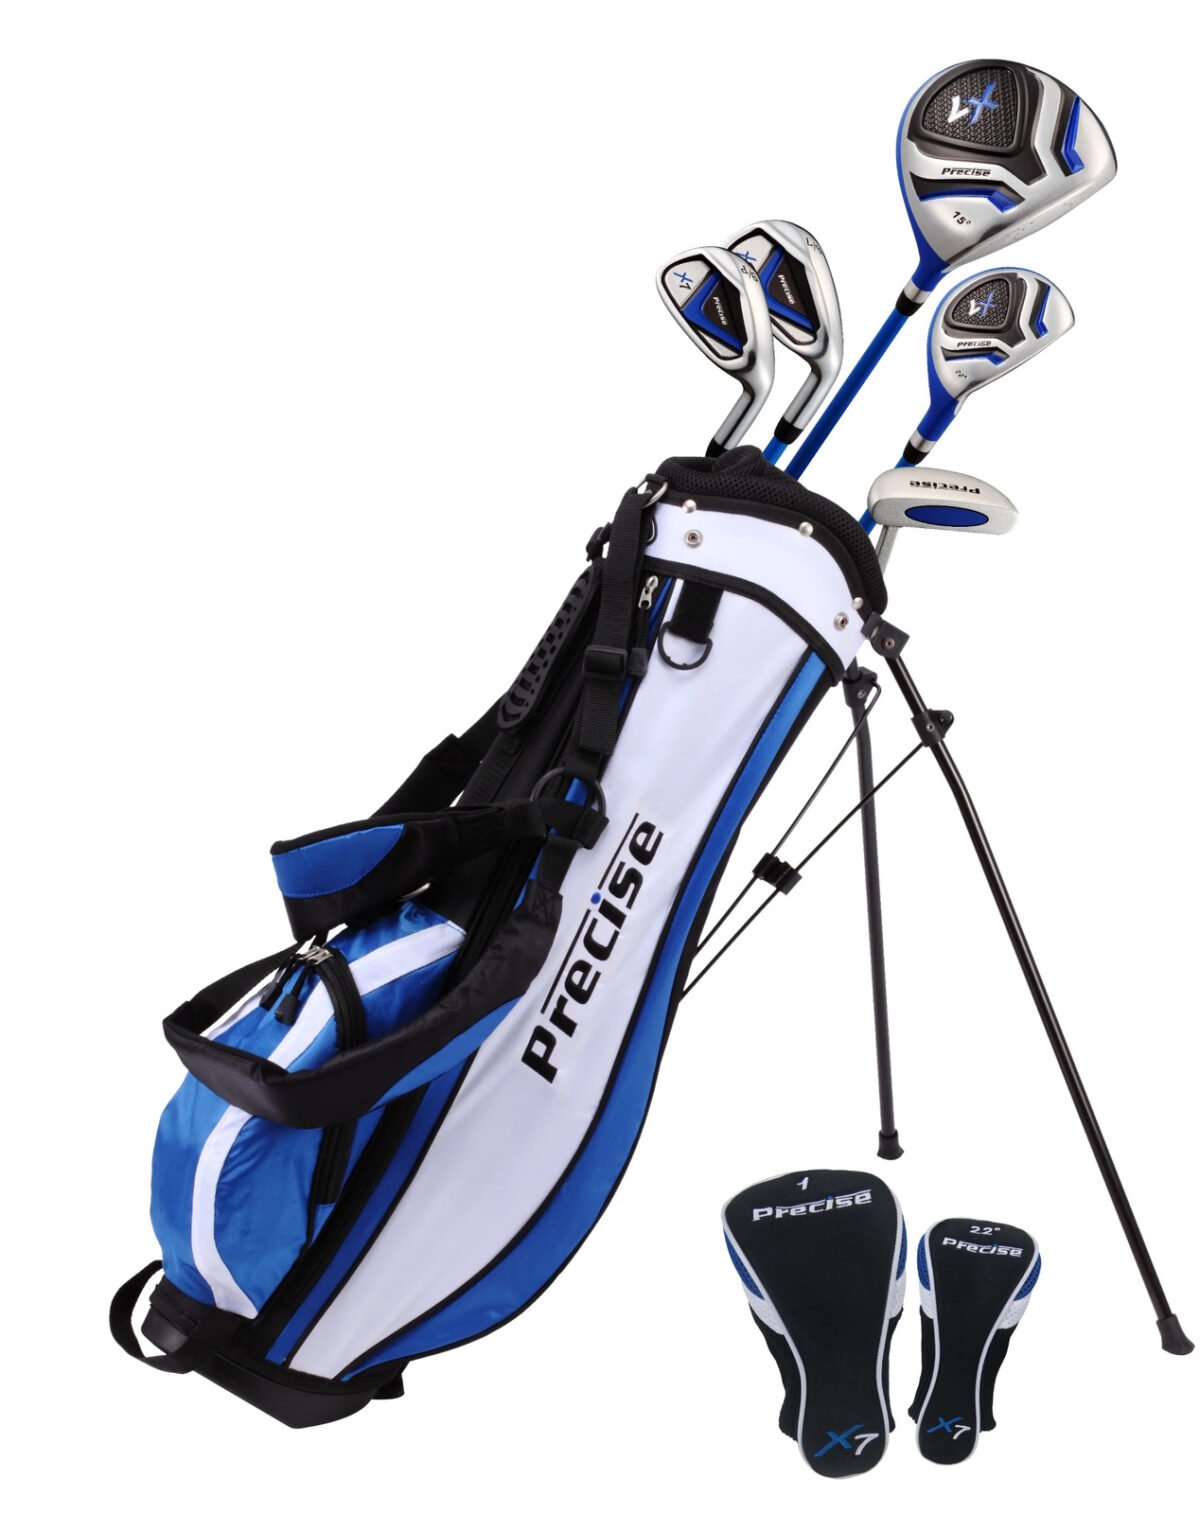 5 Golf Sets Reviewed & Compared